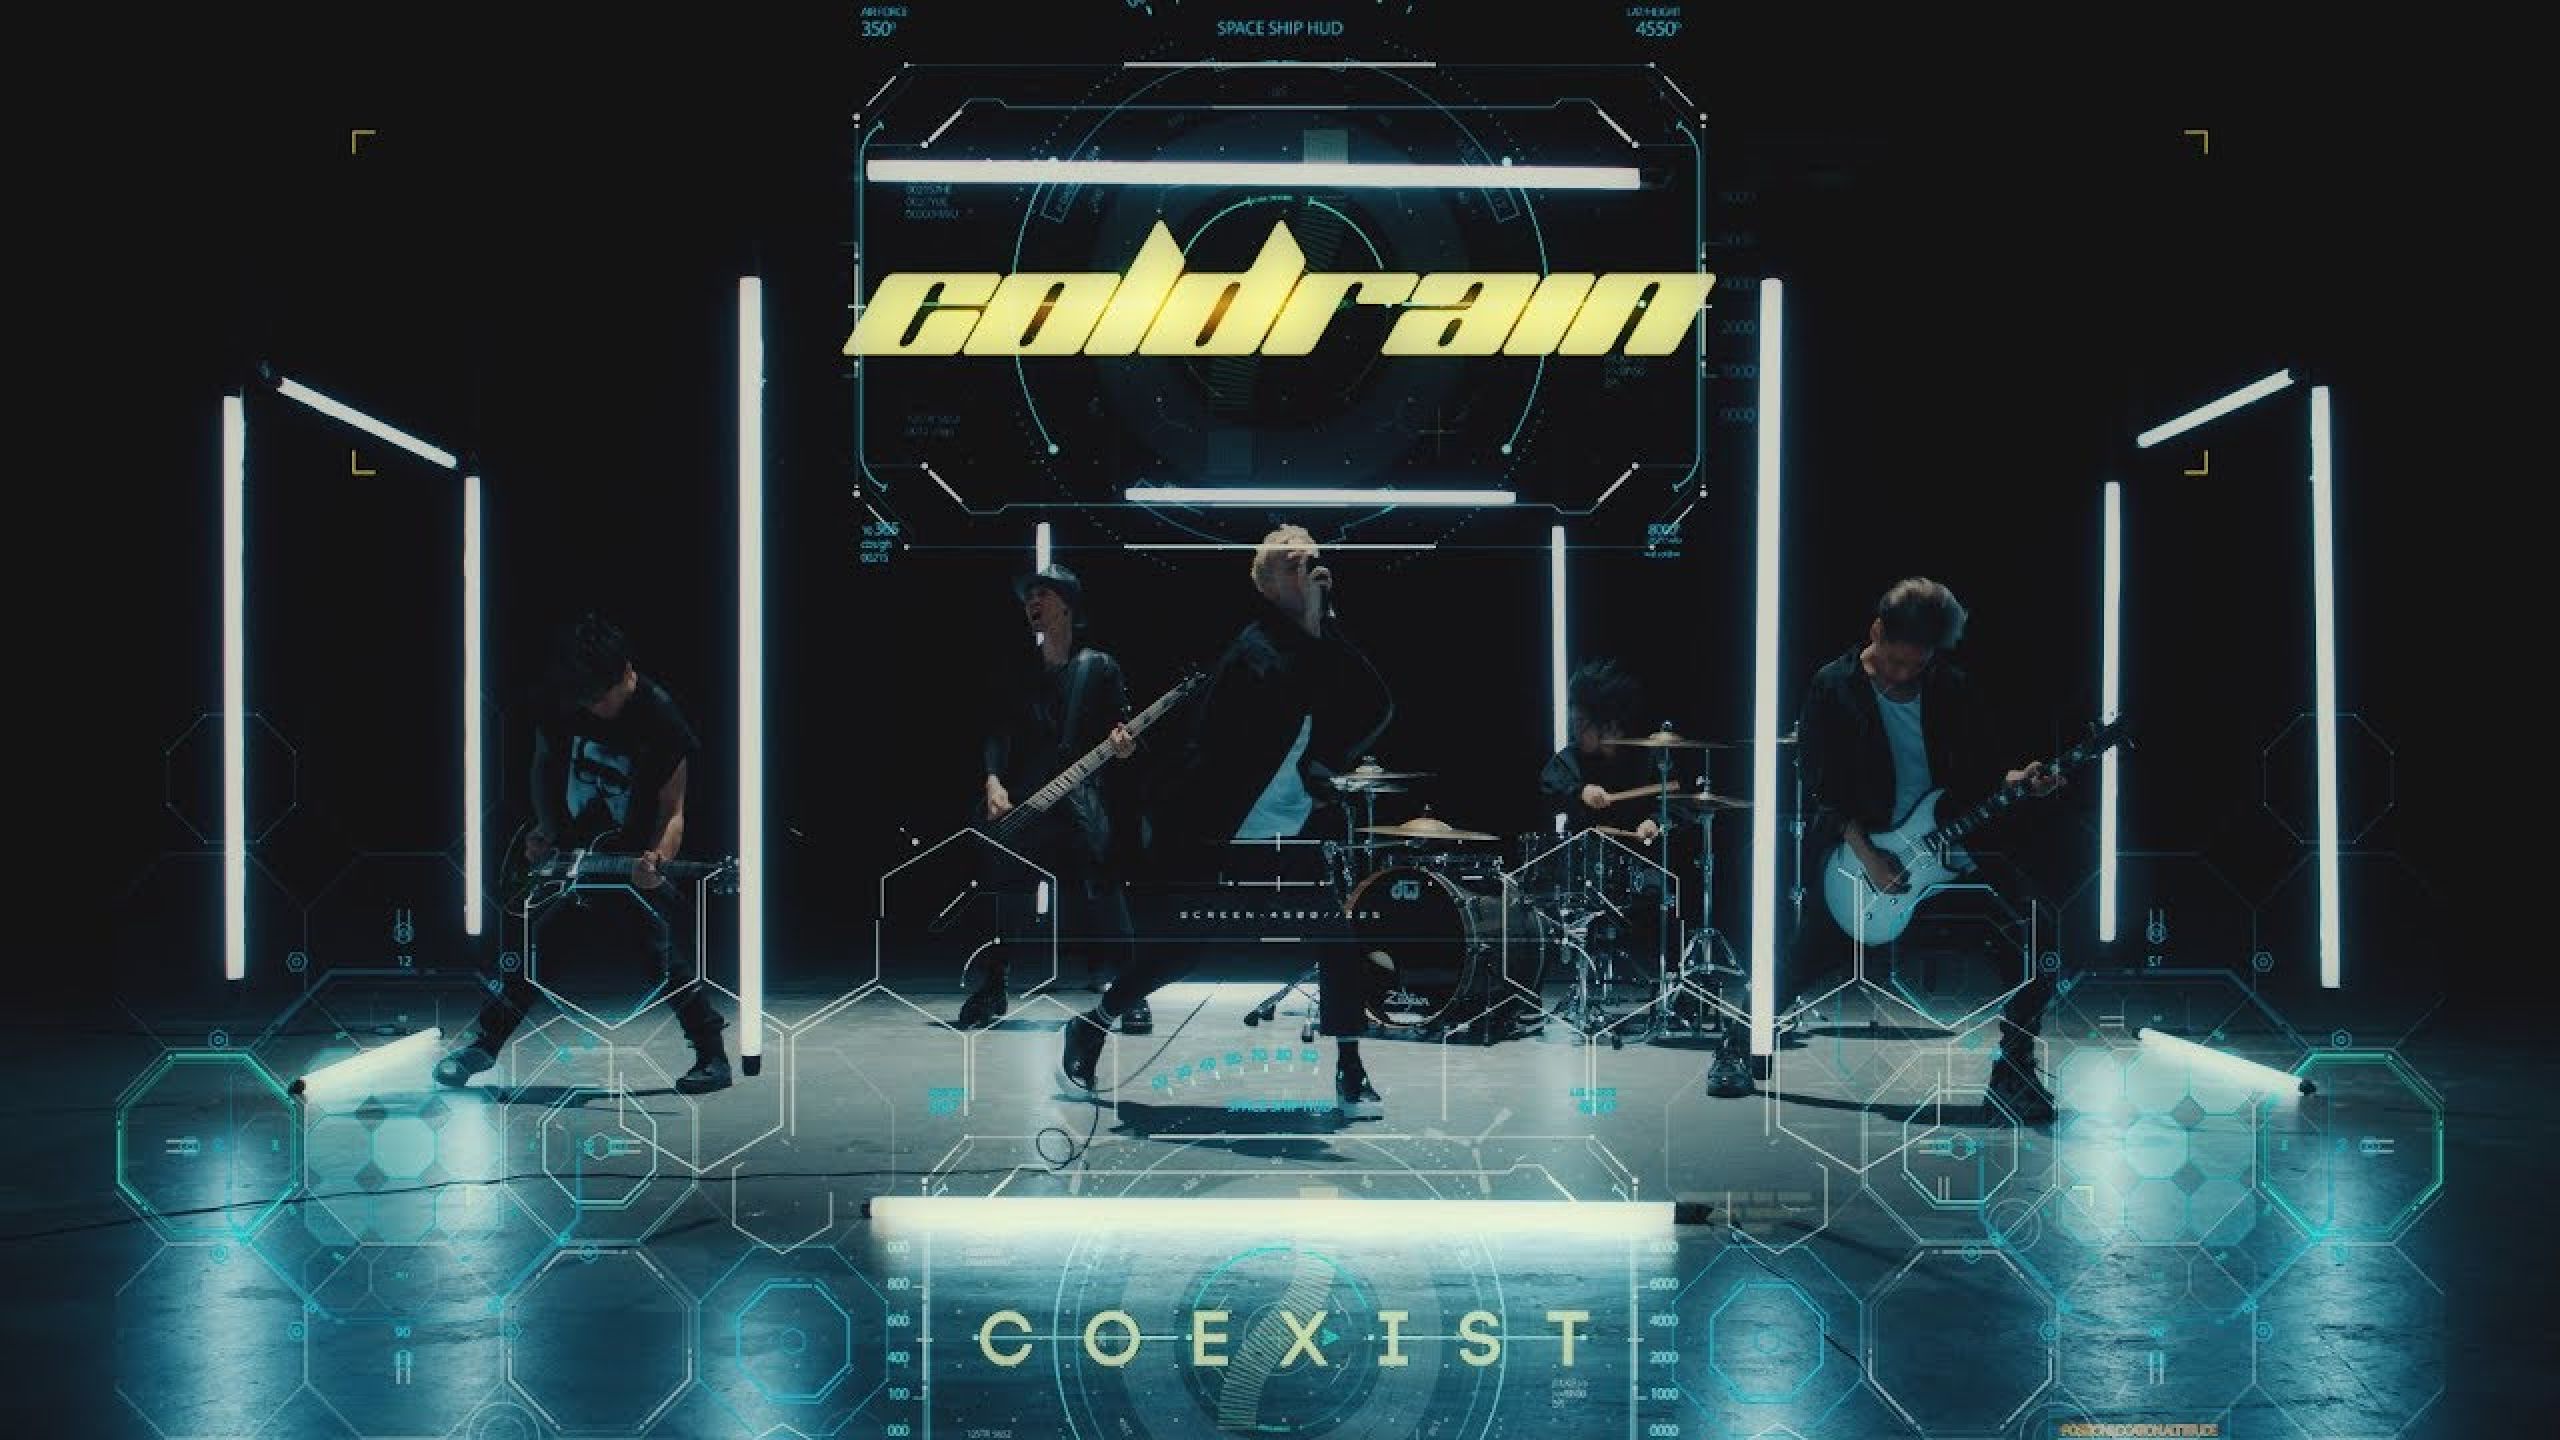 coldrain - COEXIST (Official Music Video)